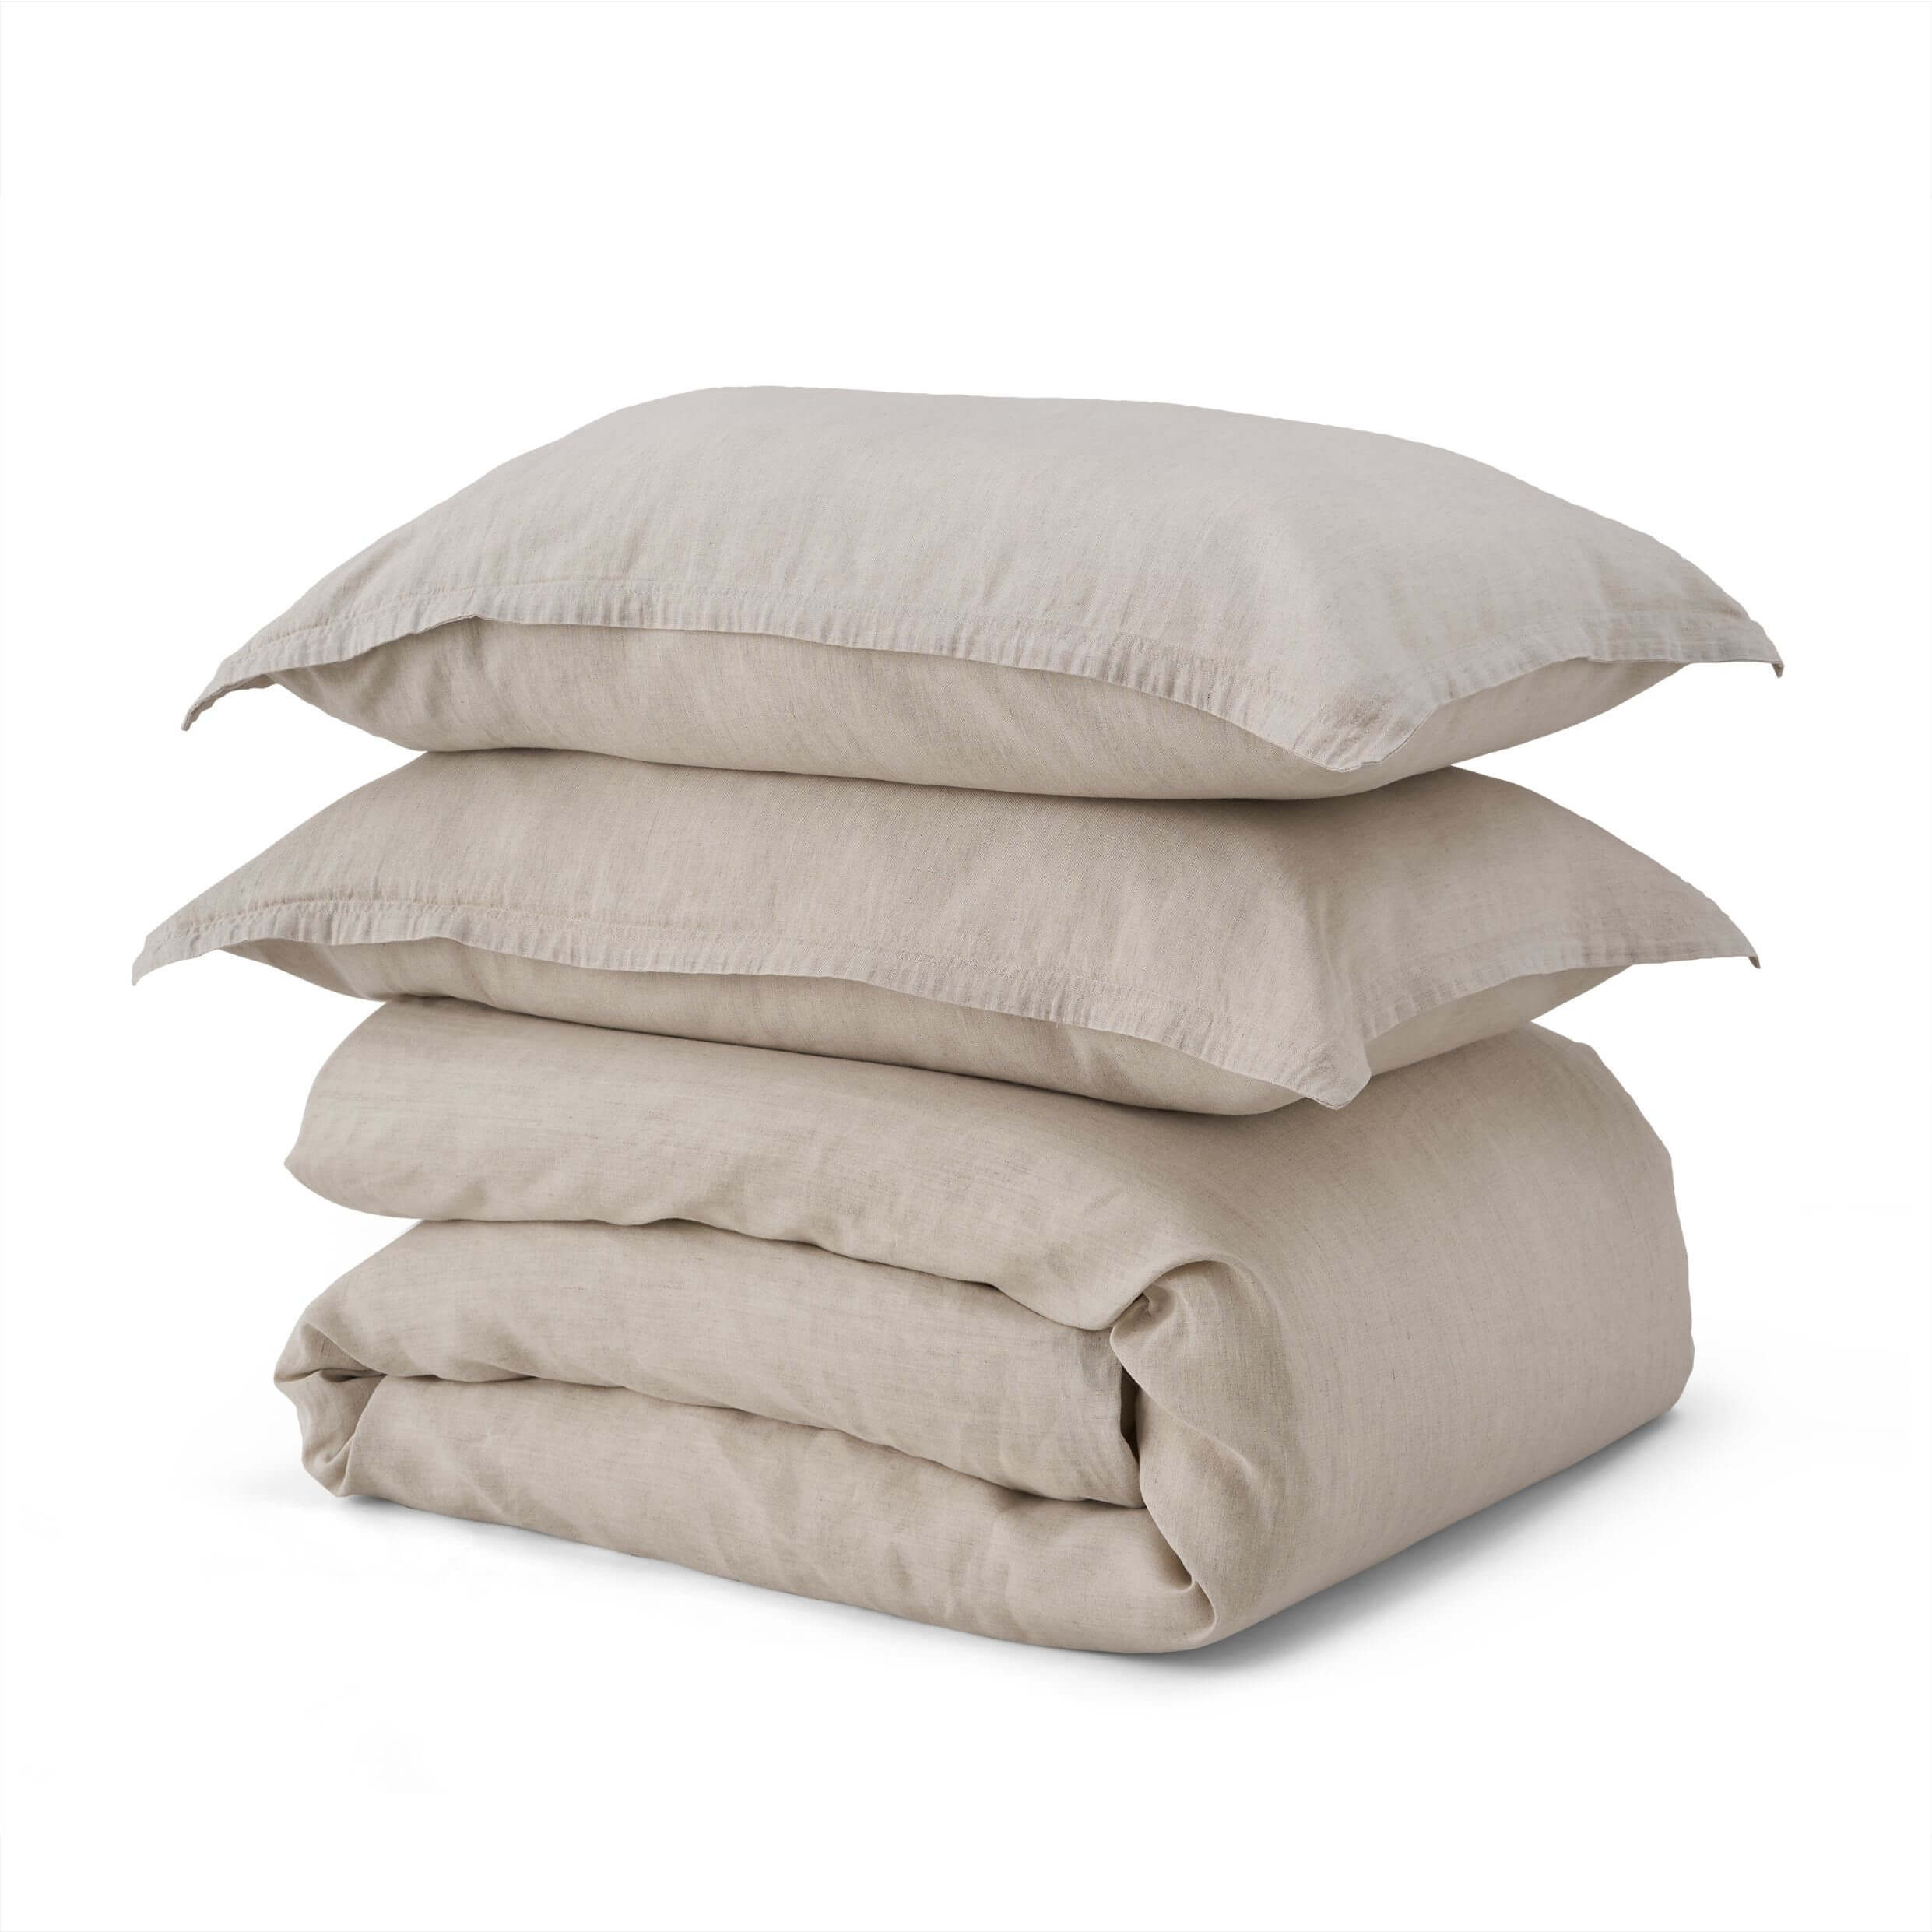 Natural Collection Bed Linen Set - image 1